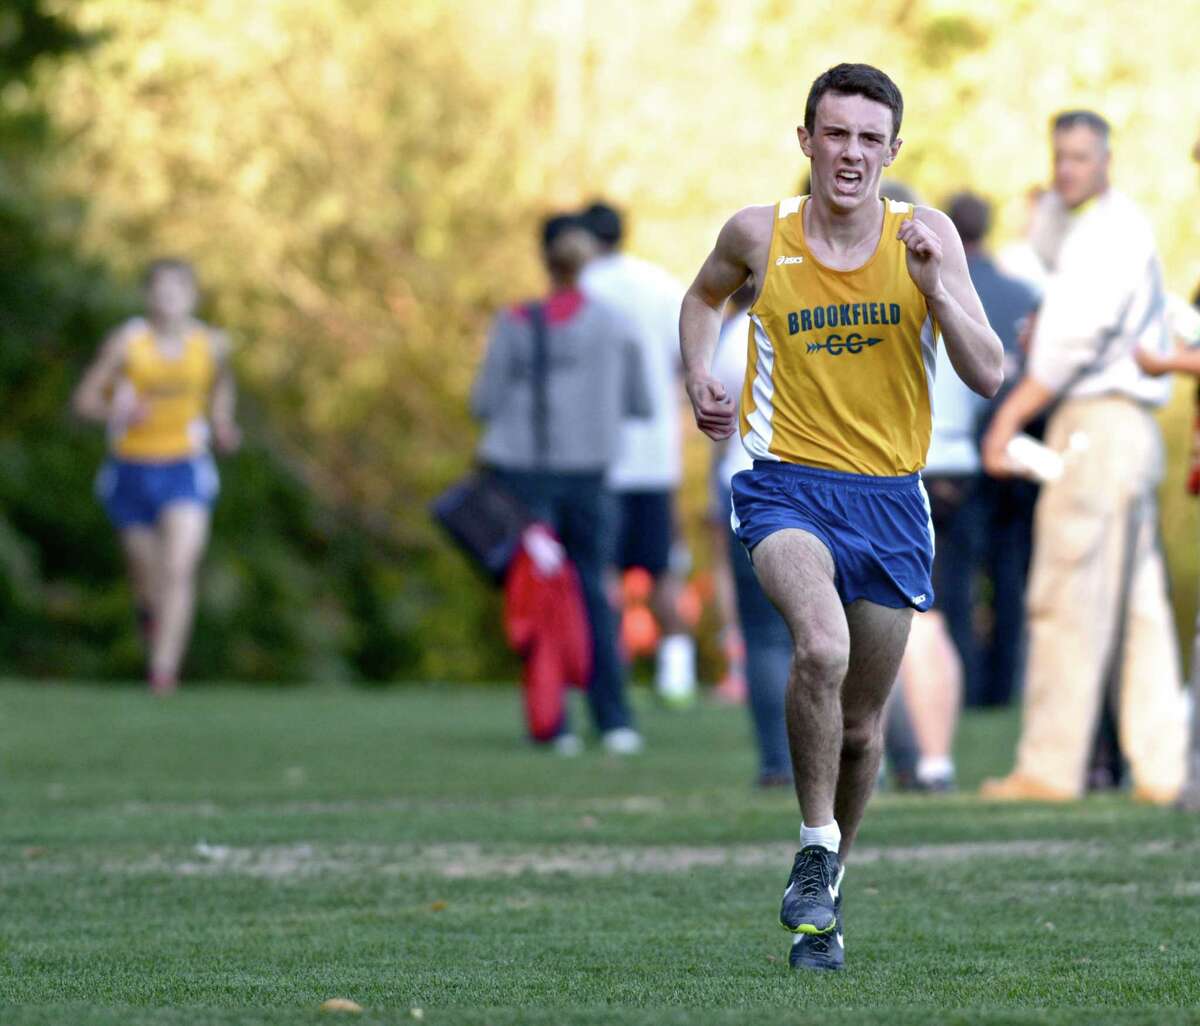 Tommy Consalvo, from Brookfield High School, took first in the boys high school cross country meet between Brookfield, Pomperaug and Newtown high schools on Tuesday, October 6, 2015, at Reed Intermediate School, Newtown, Conn.